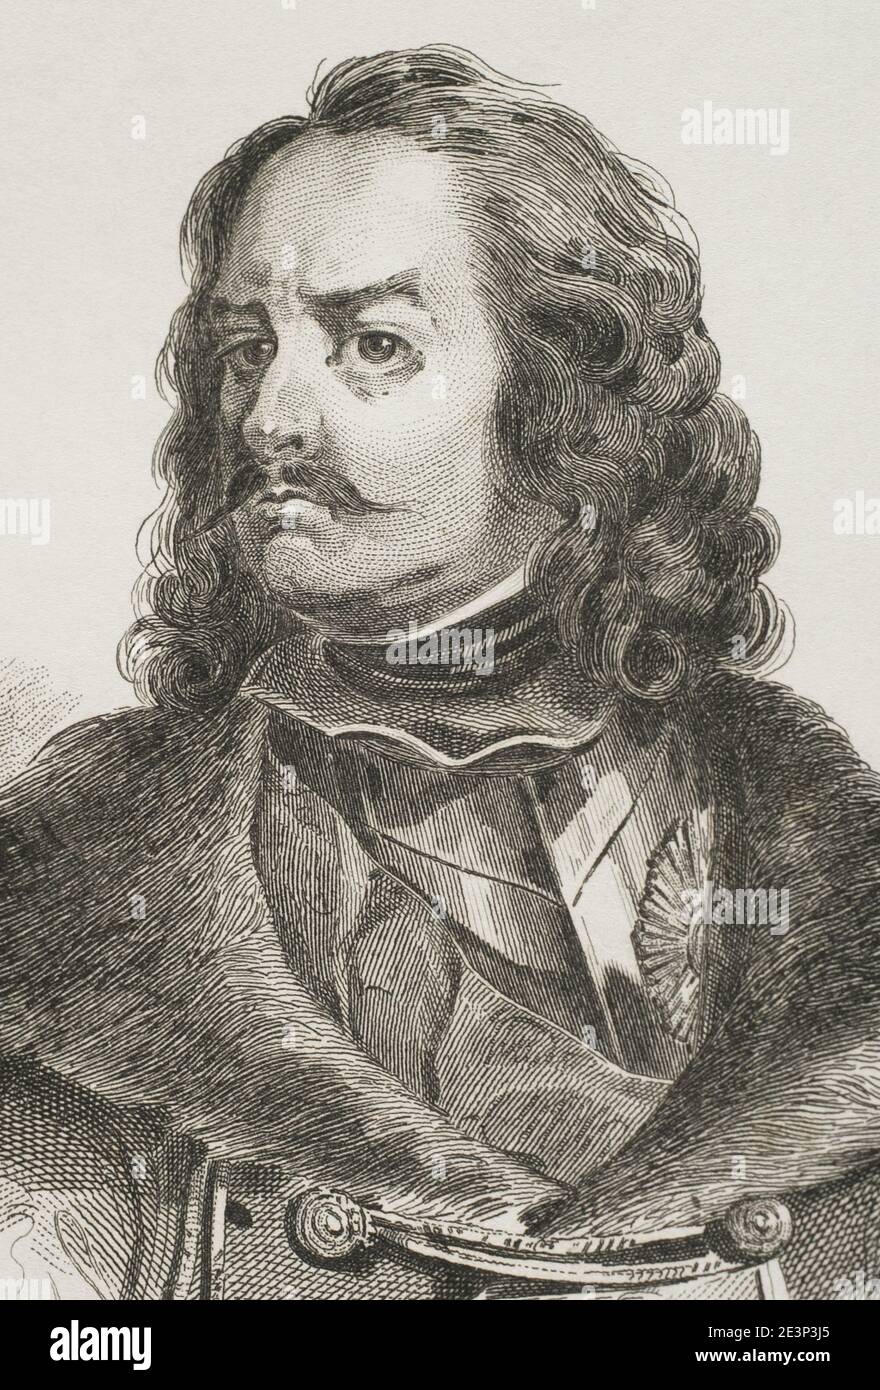 Peter I, byname Peter the Great, Russian in full Pyotr Alekseyevich (1672-1725). Tsar and Emperor of al the Russias. Potrait, detail. Engraving by Lemaitre, Vernier and Moret. History of Russia by Jean Marie Chopin (1796-1870). Panorama Universal, Spanish edition, 1839. Stock Photo